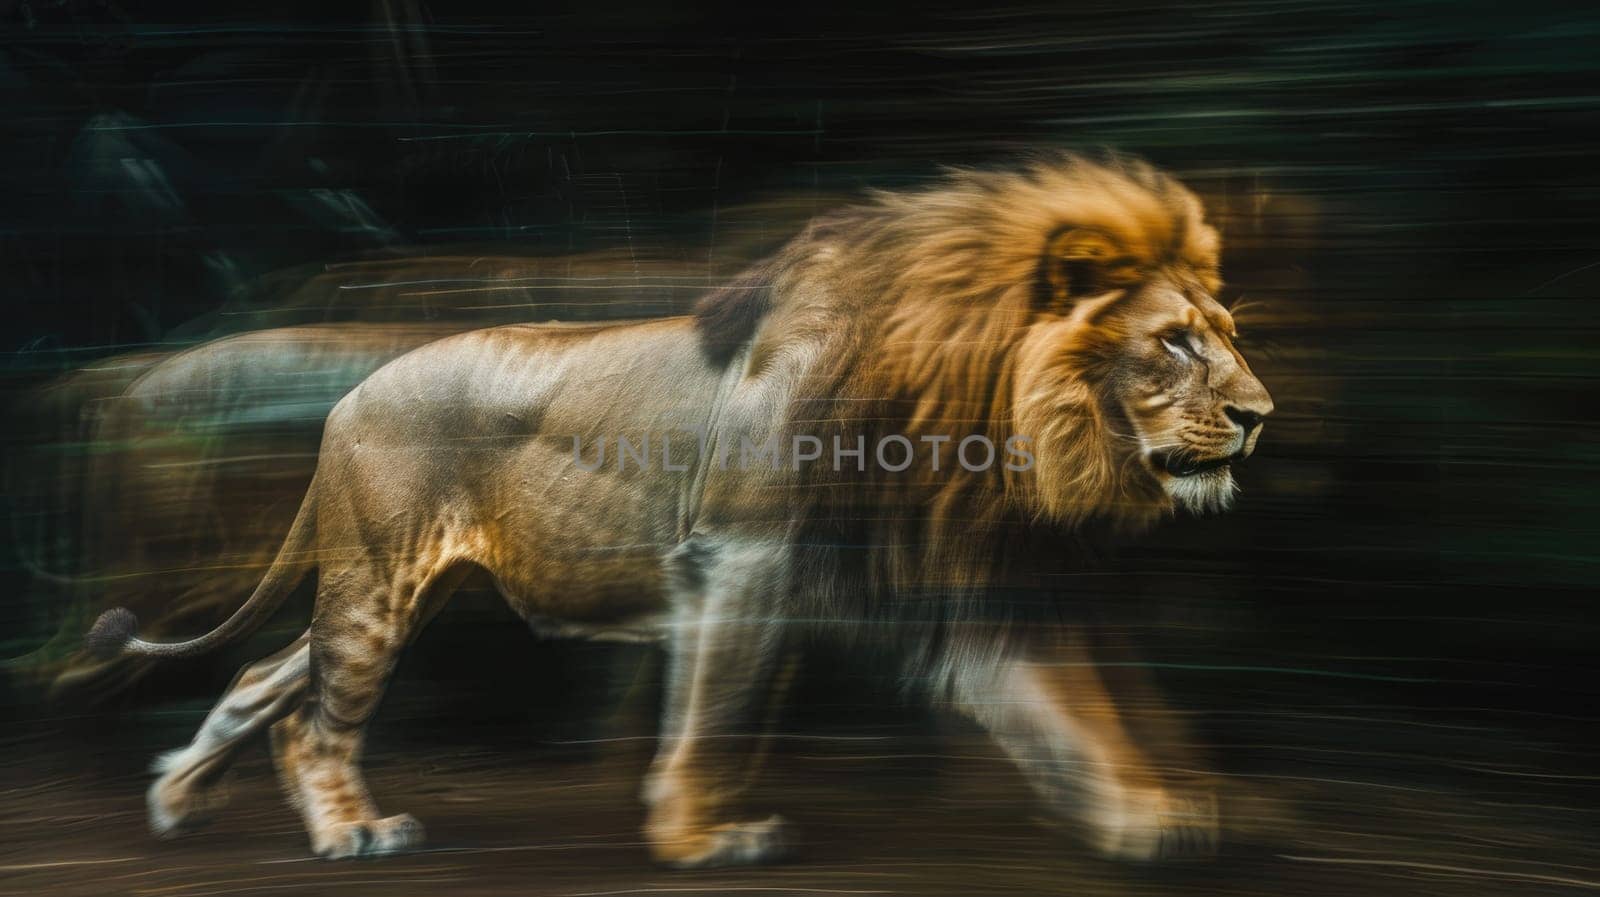 A lion is standing in tall grass, Long exposure blurry shot of a lion, Portrait of lion in motion blur.